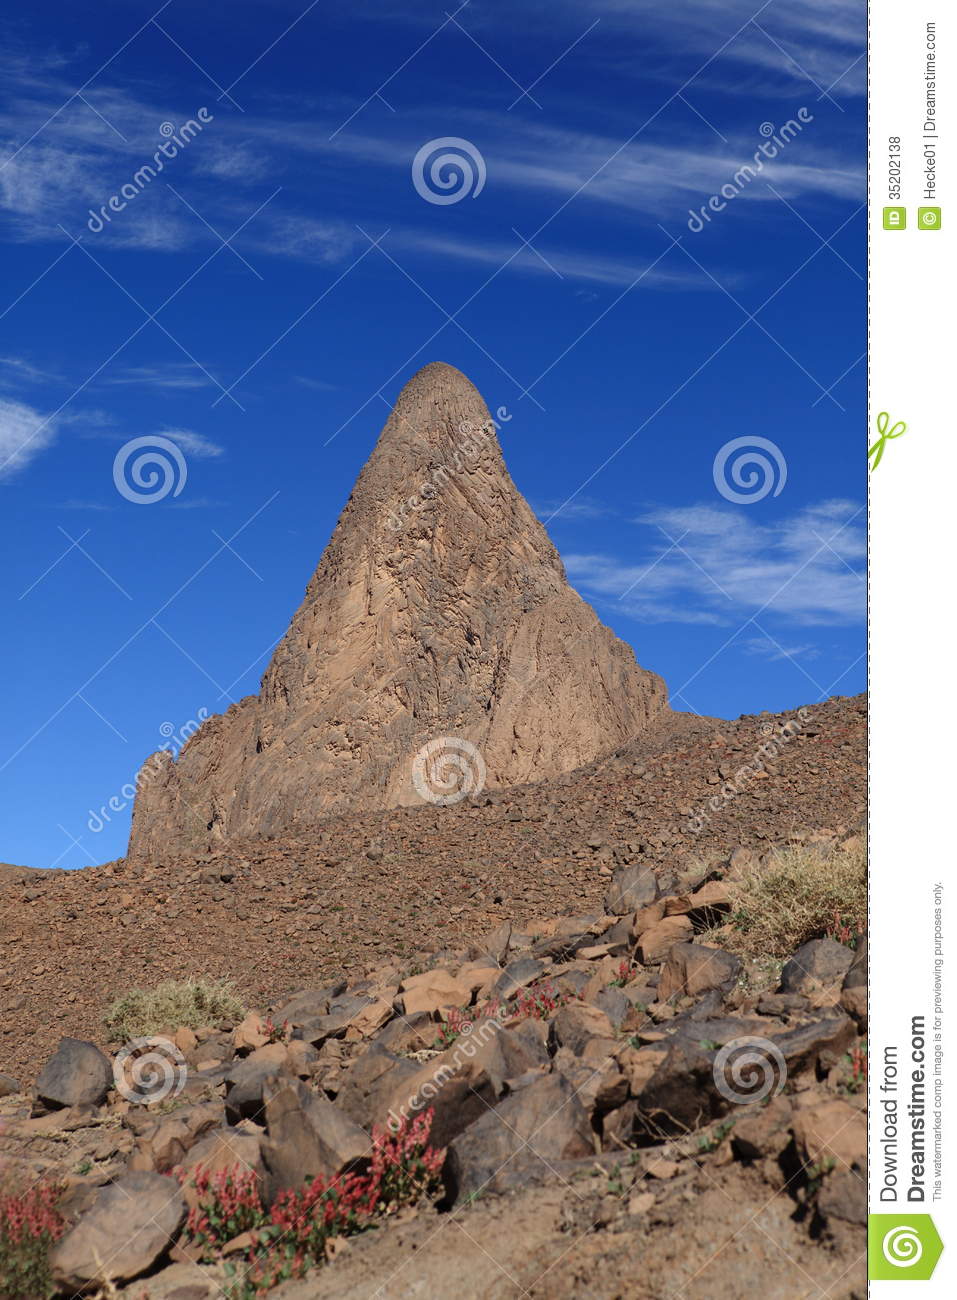 Hoggar Mountains clipart #3, Download drawings